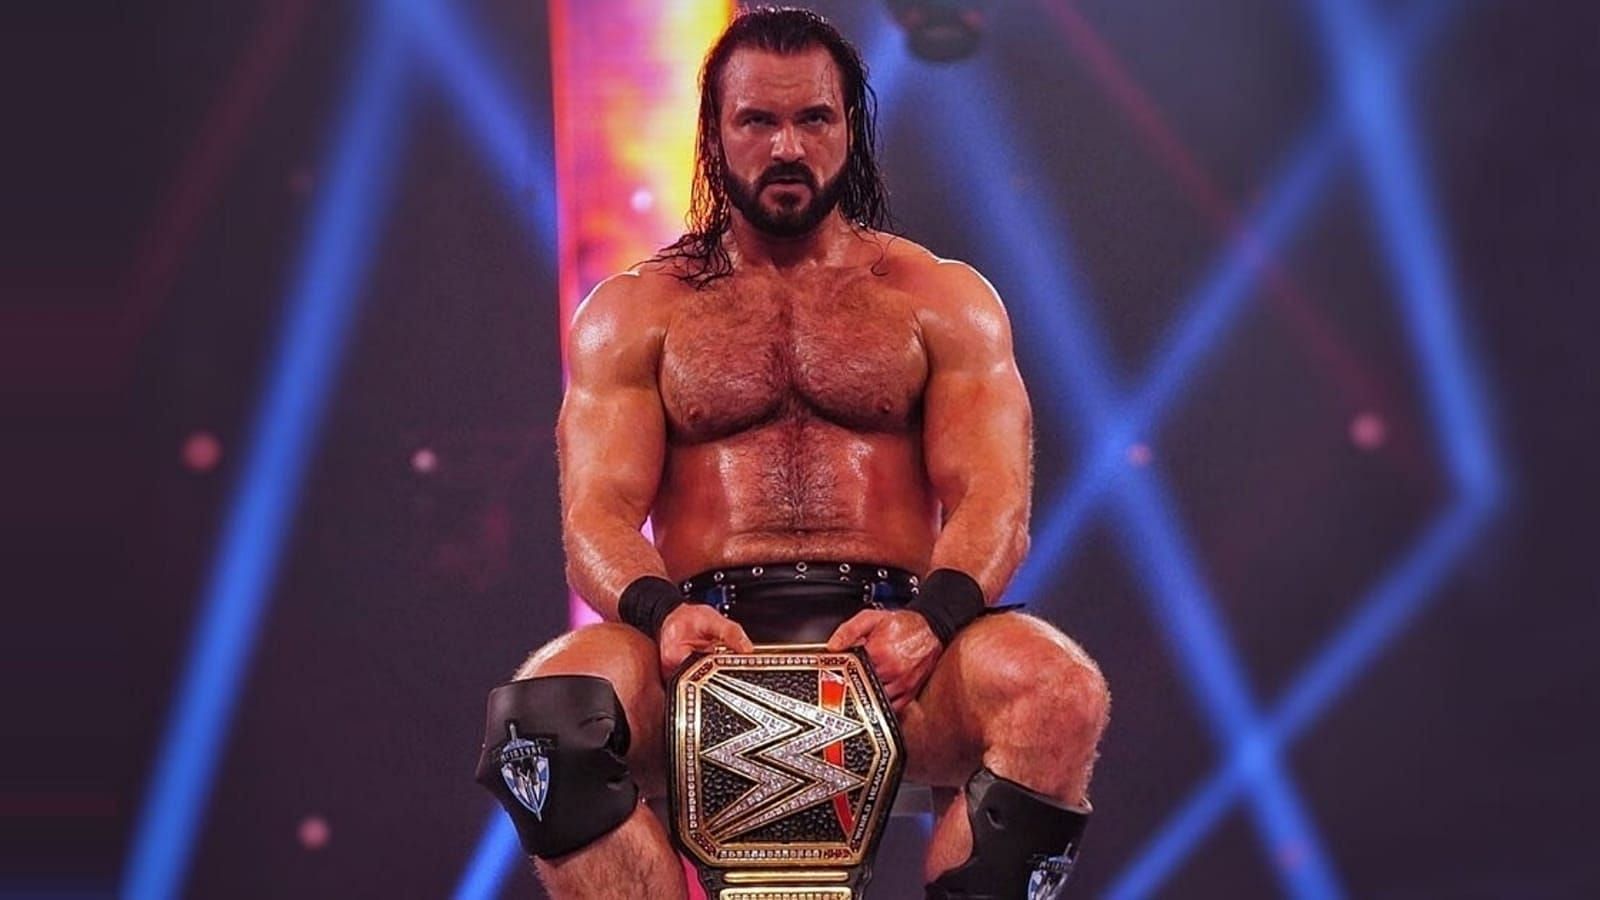 Drew McIntyre is a former two-time WWE Champion.